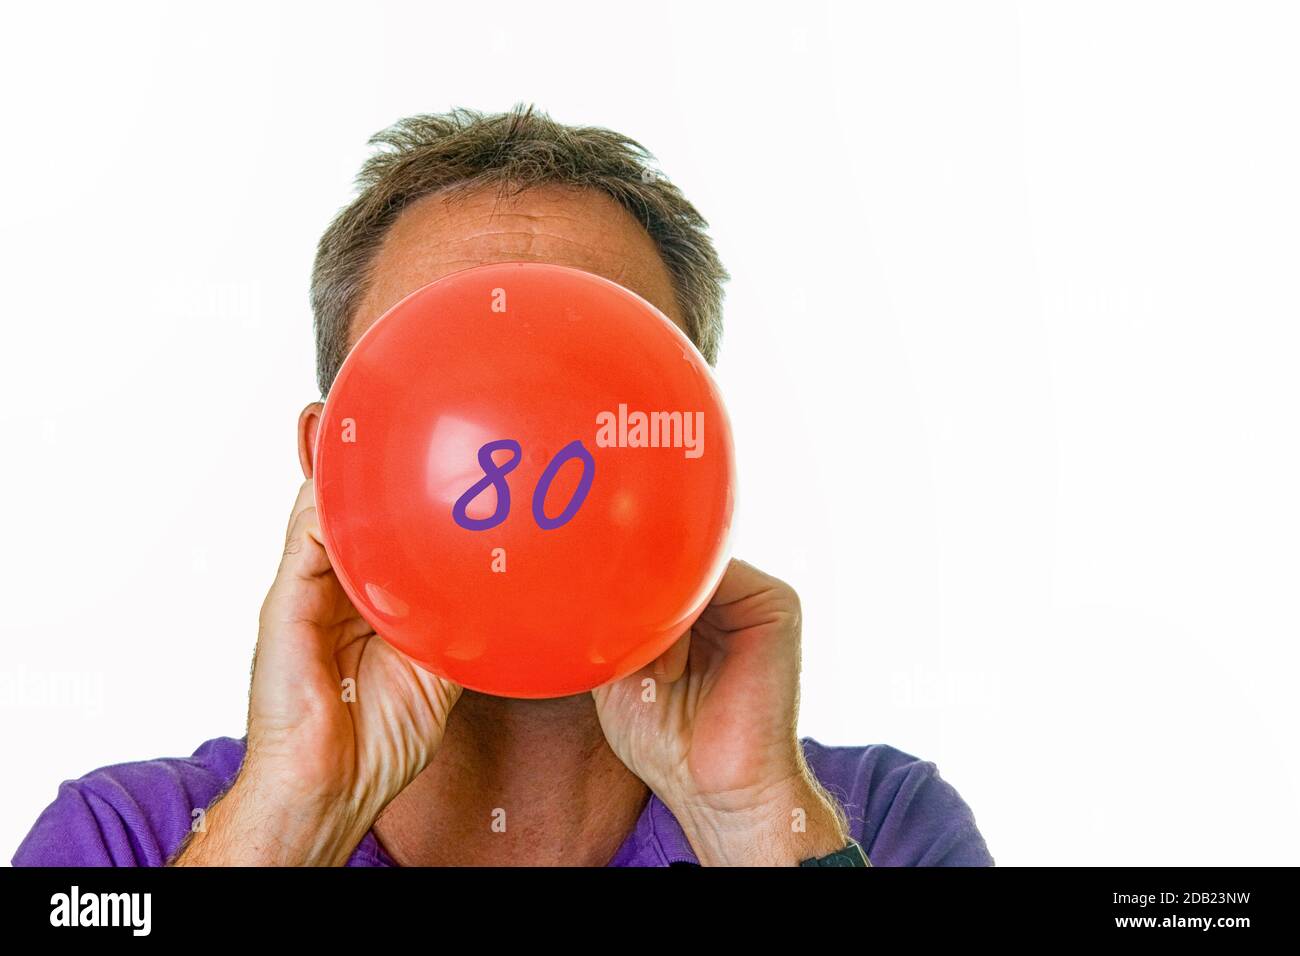 Man blowing red balloon with number 80 Stock Photo